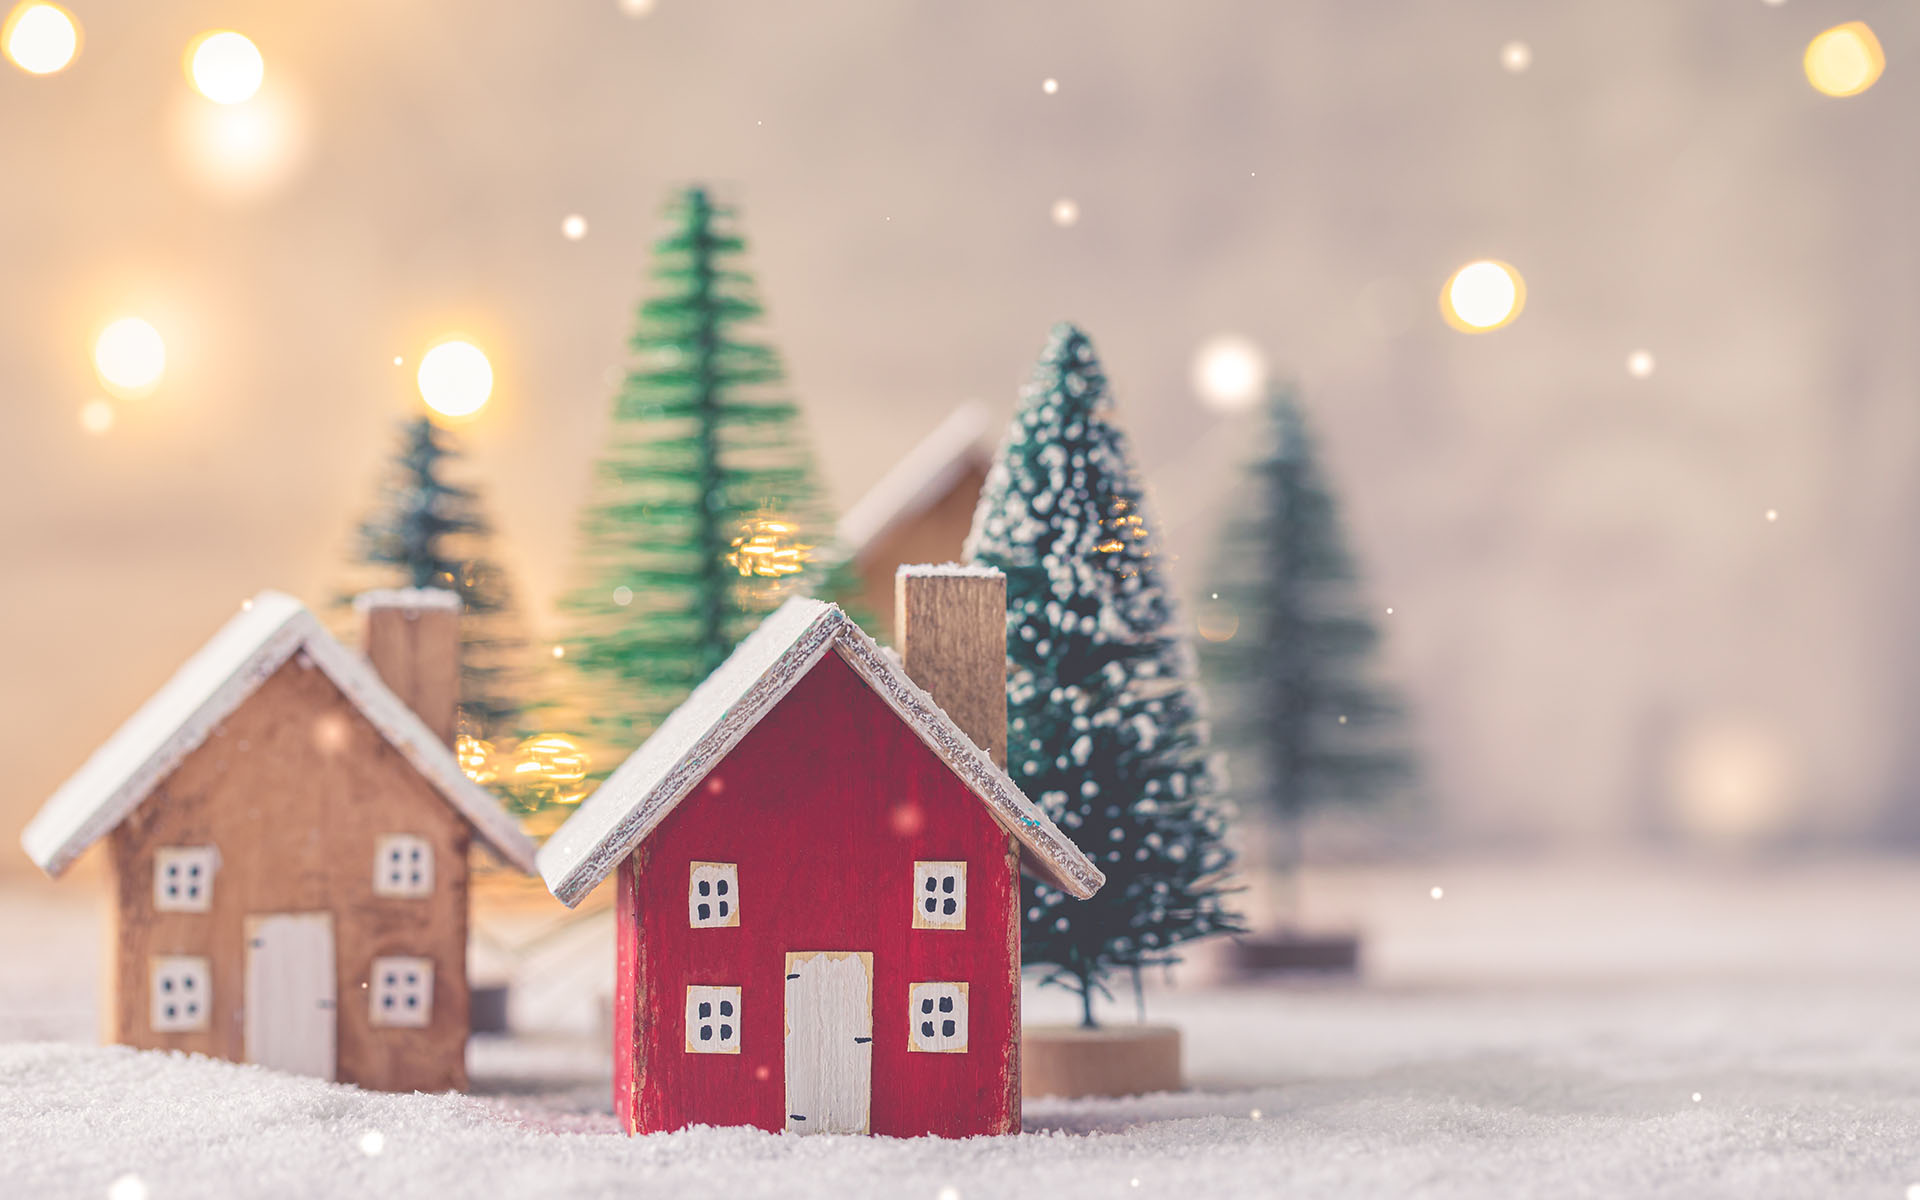 Home for the Holidays: A Self-Love Practice -Miniature wooden houses on the snow over blurred Christmas decoration background, toned, postcard concept